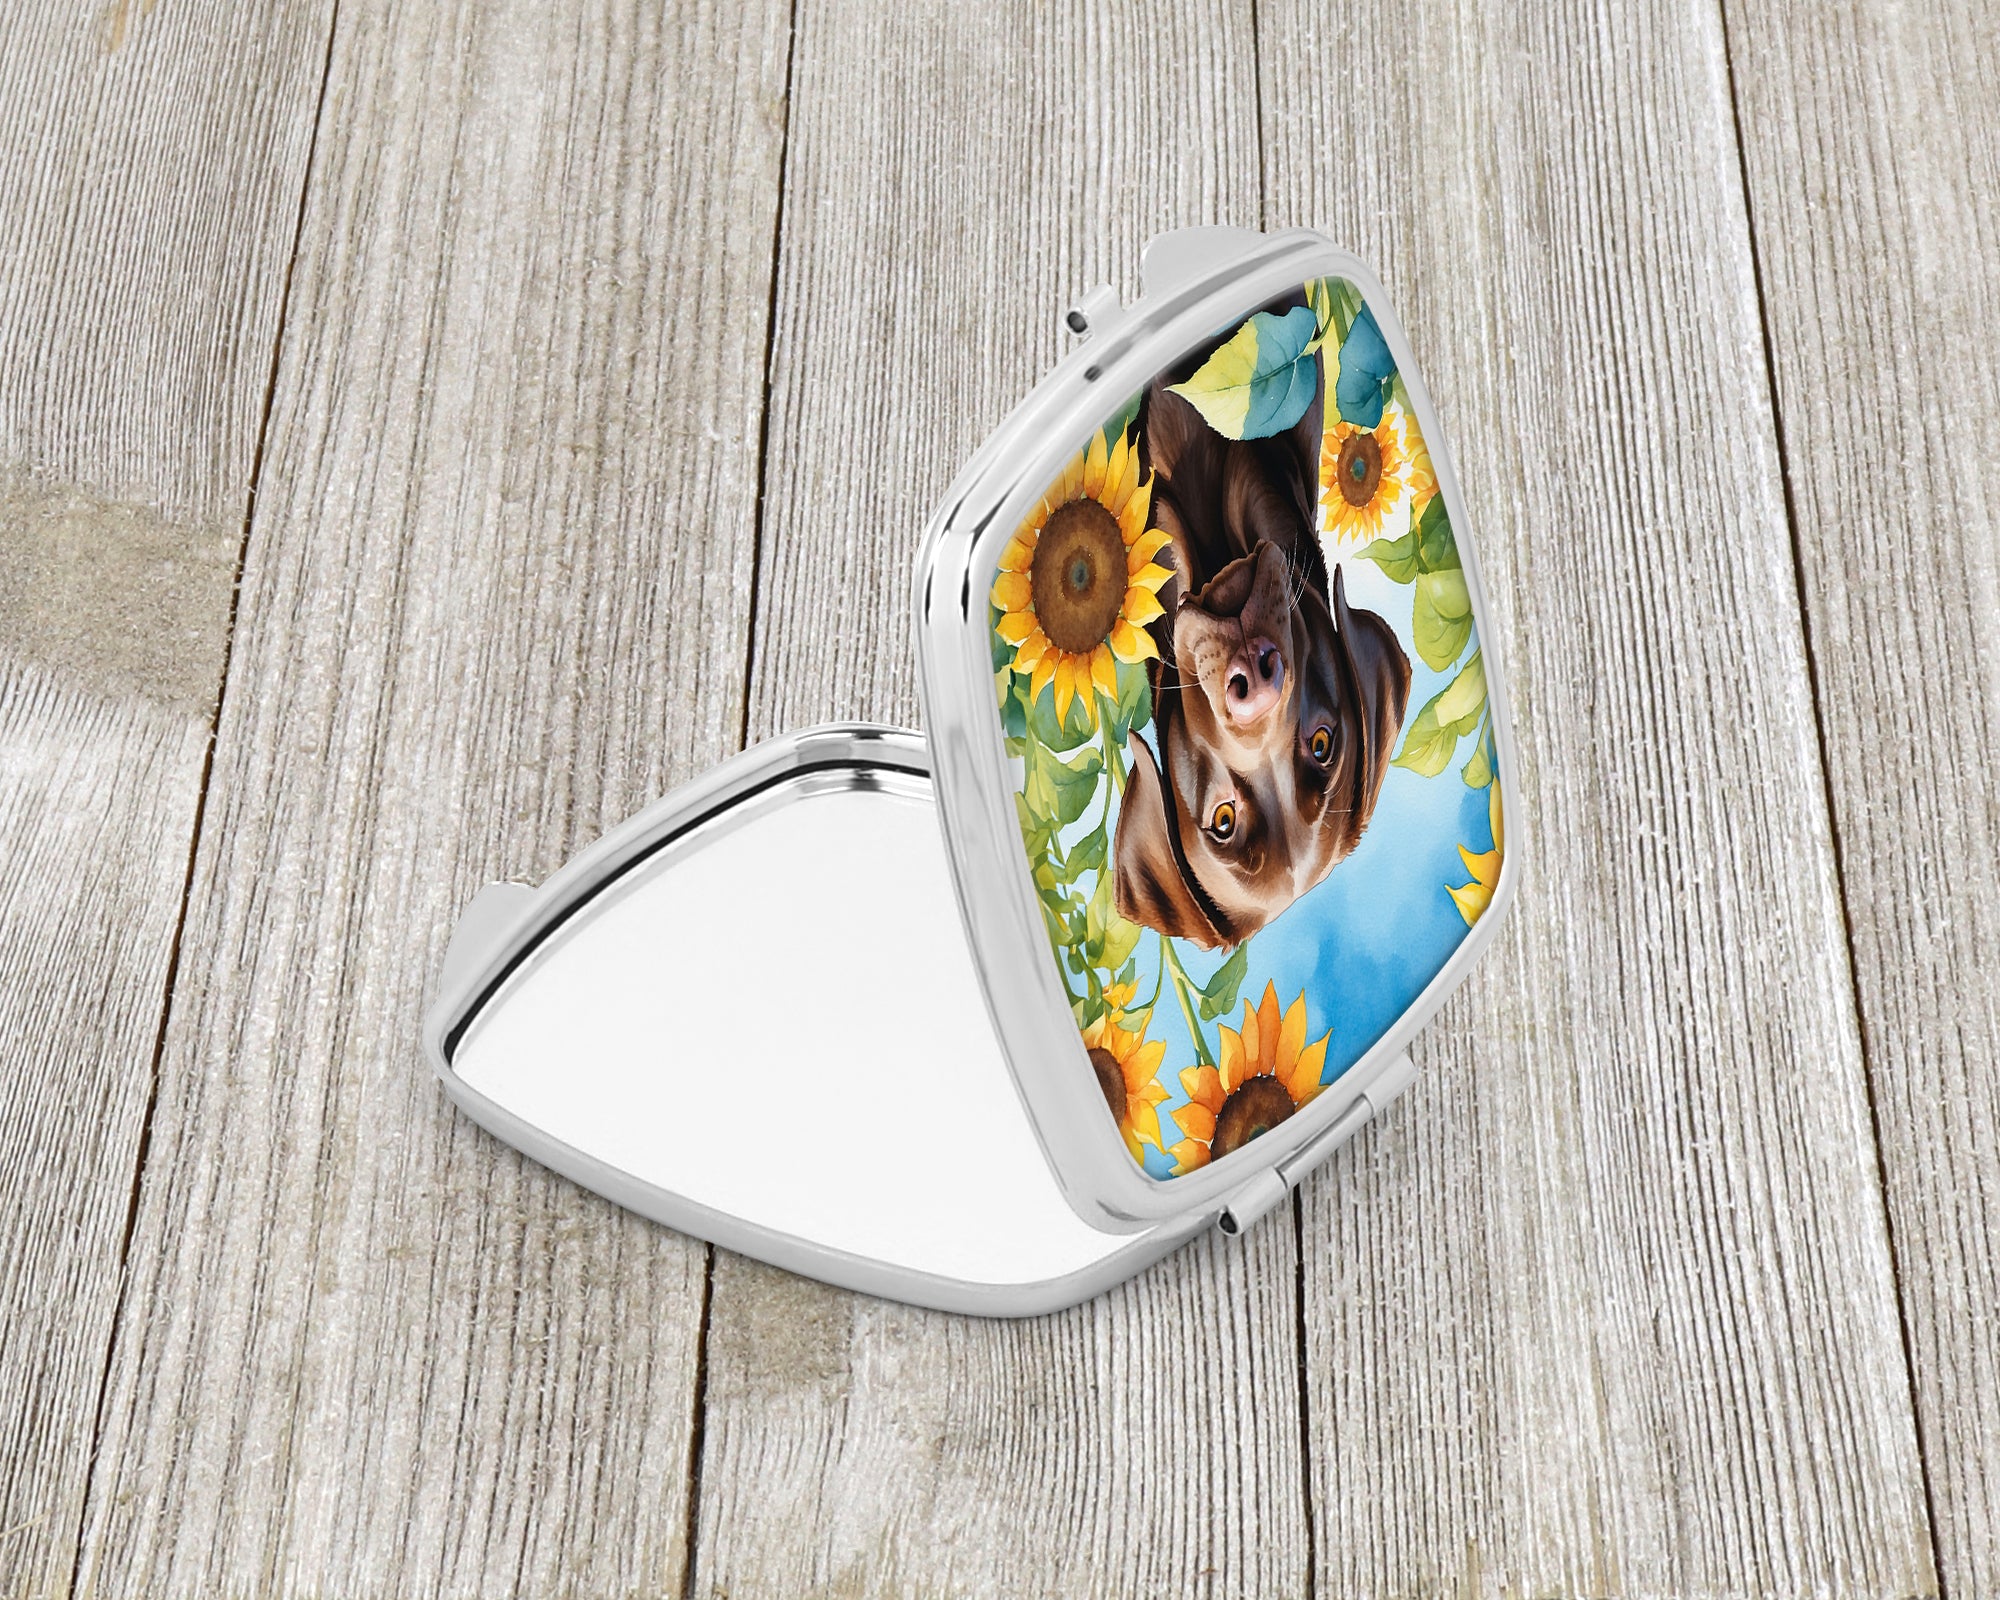 Buy this Labrador Retriever in Sunflowers Compact Mirror